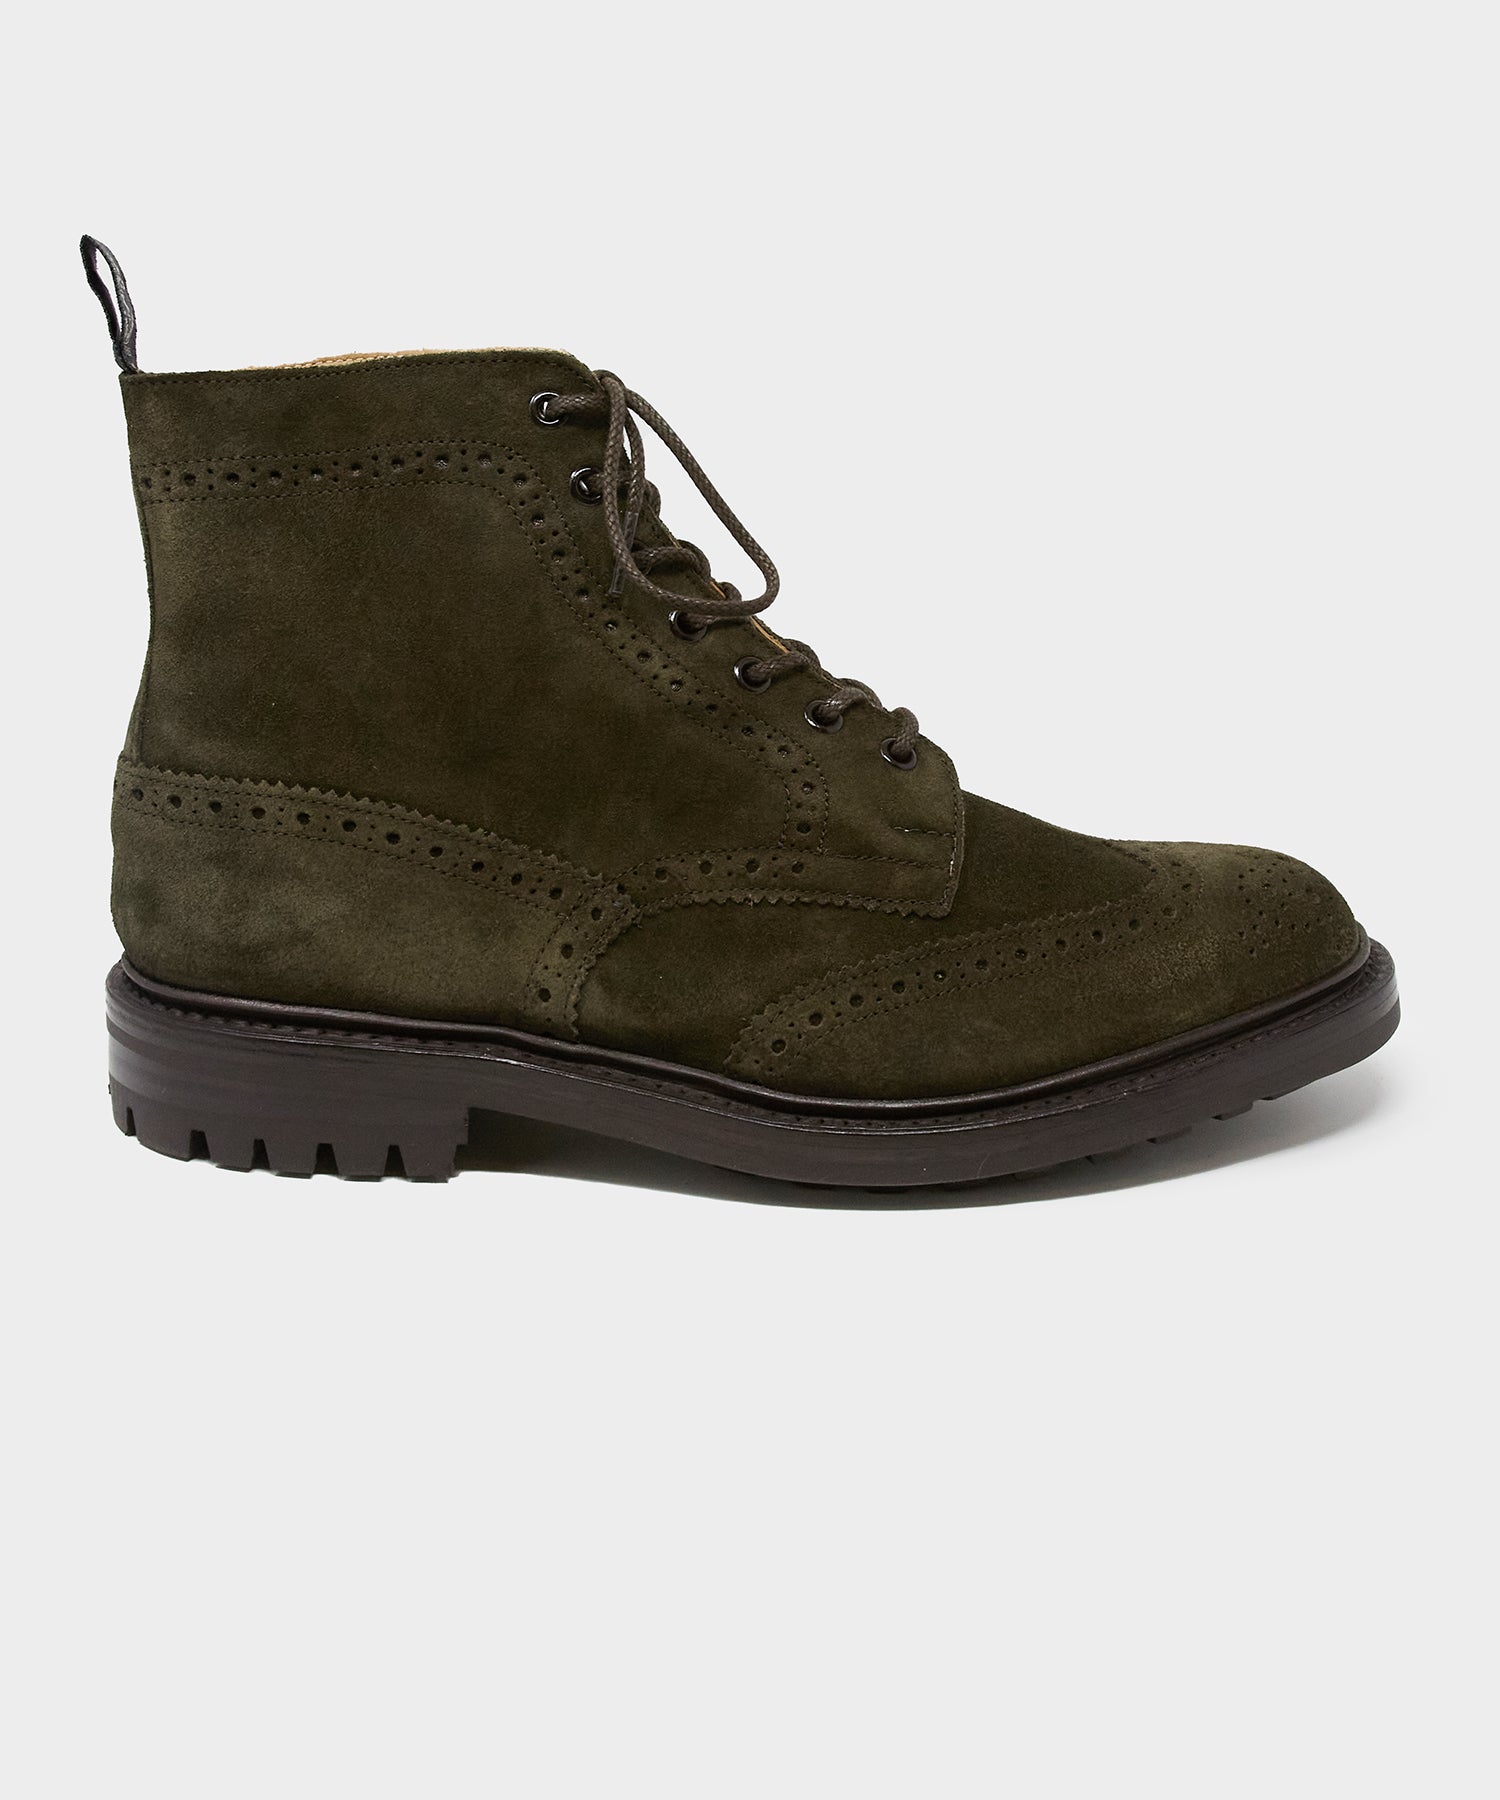 Todd Snyder x Tricker's Suede Stow Boot In Earth